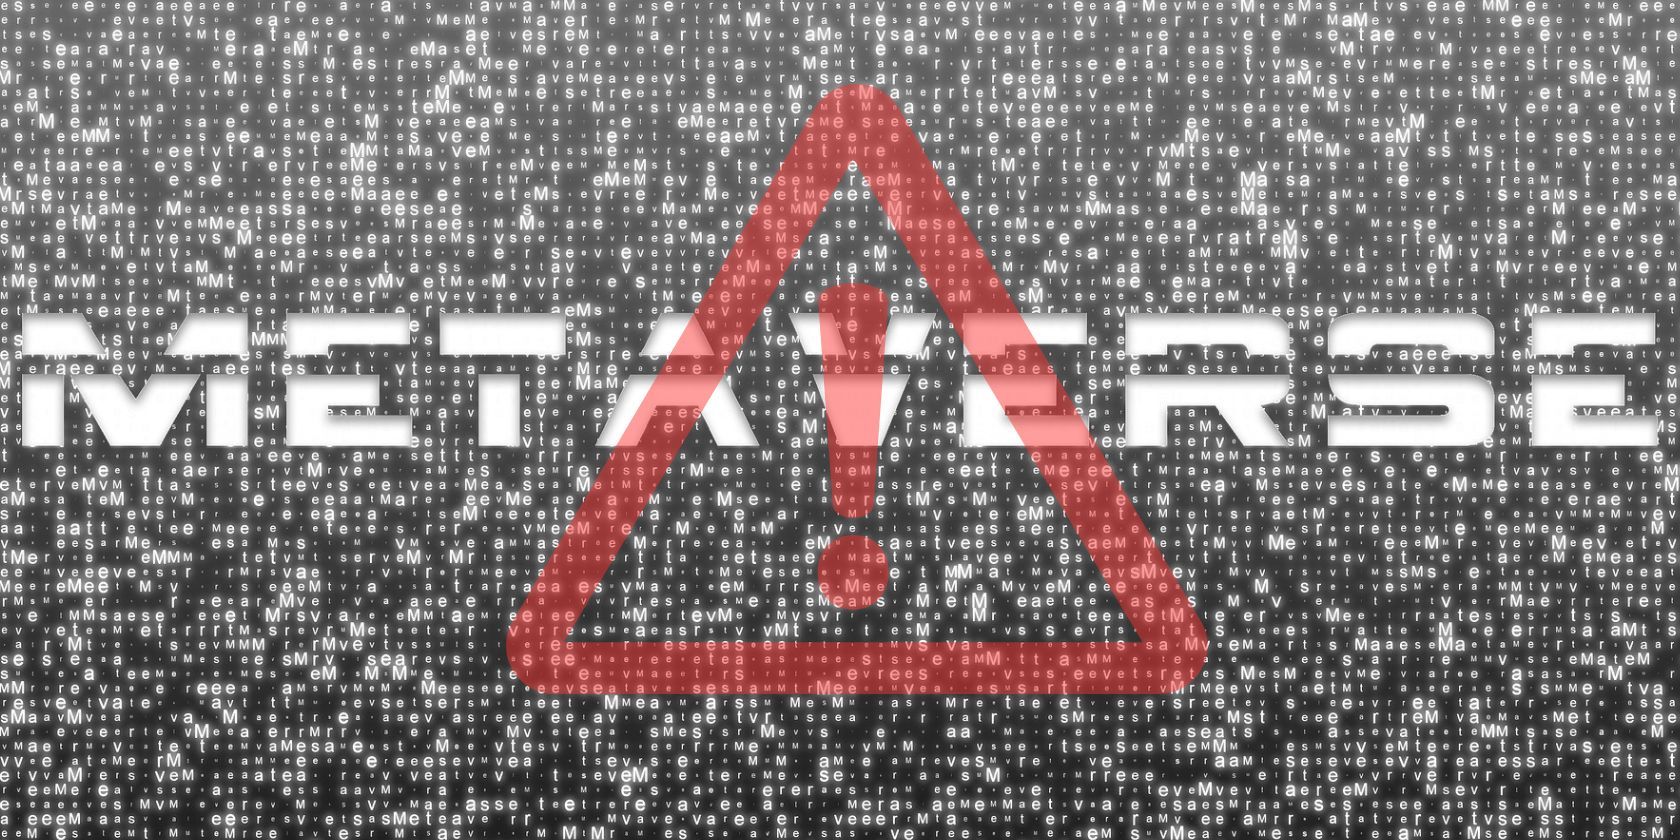 black and white metaverse graphic with red alert symbol